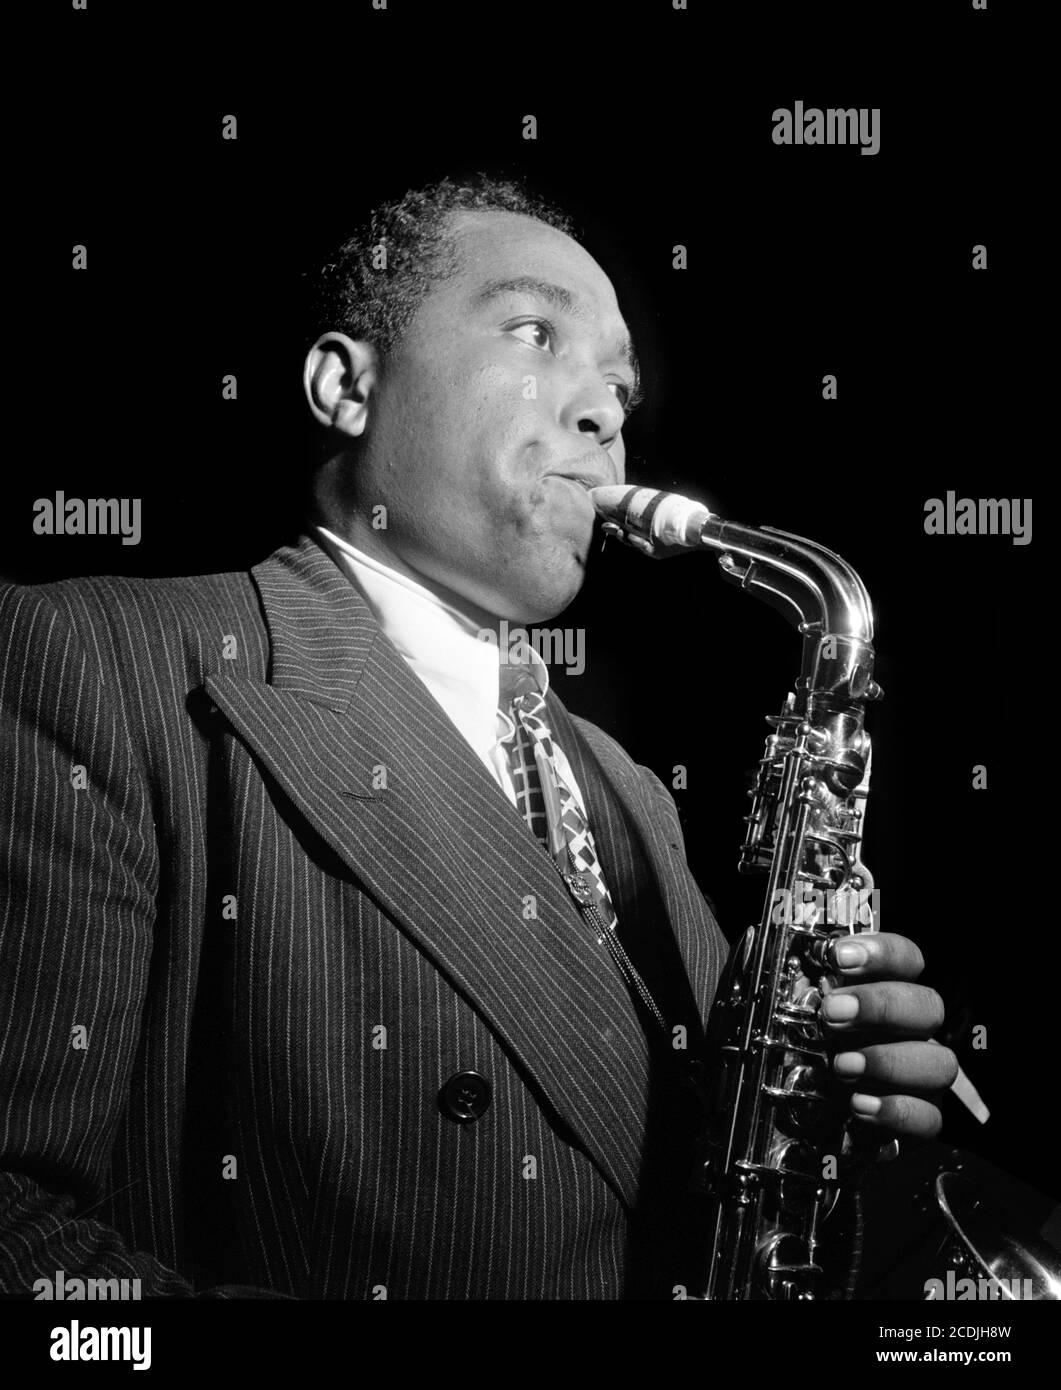 Charlie Parker. Portrait of the American saxophonist Charlie Parker (1920-1955) in the Three Deuces, New York, c.1947. Stock Photo